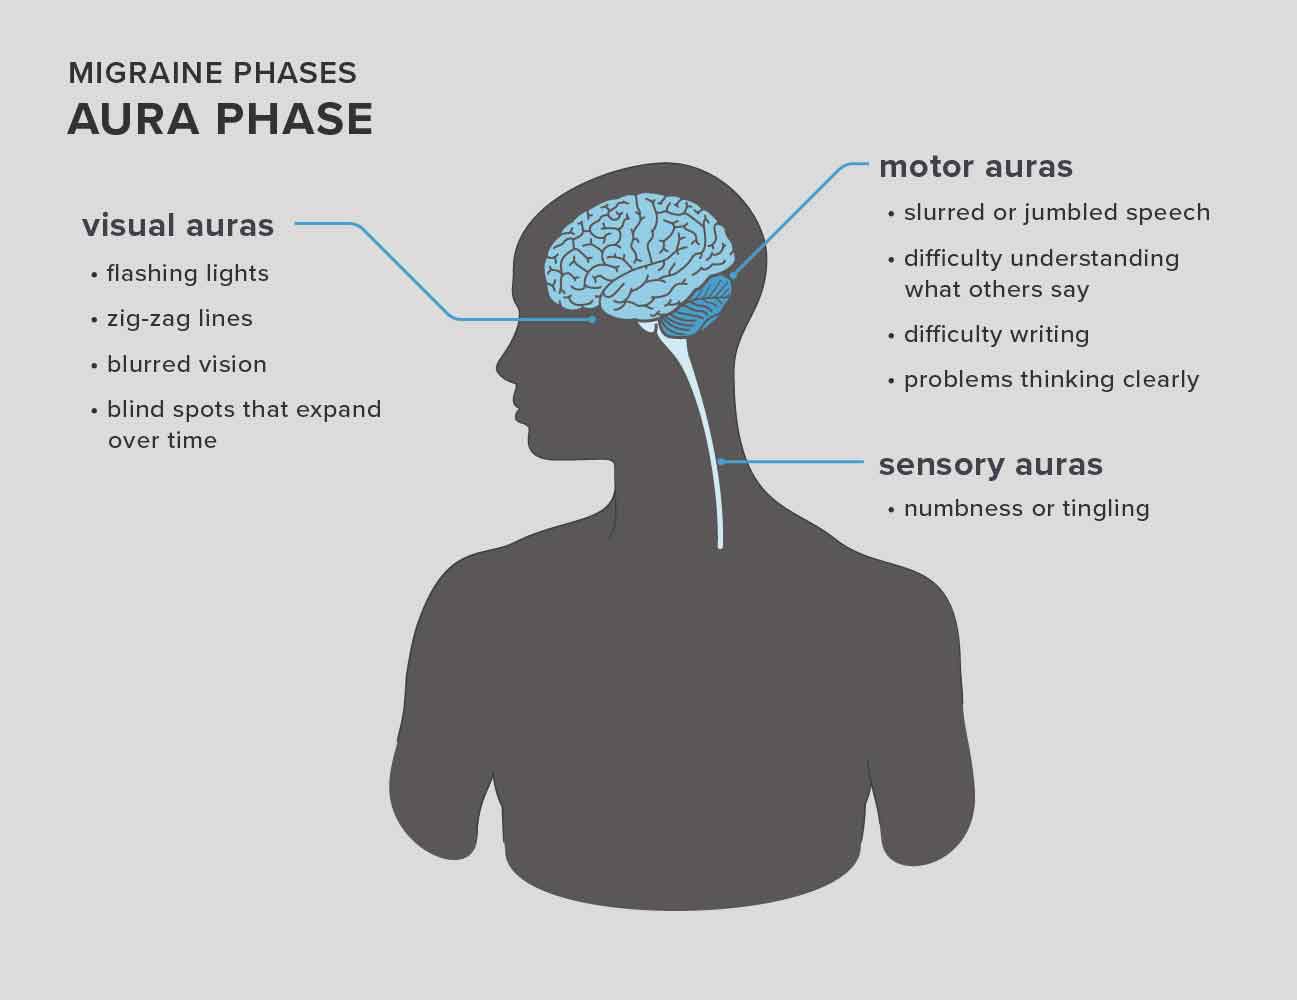 Migraine Phases and Aura Phase